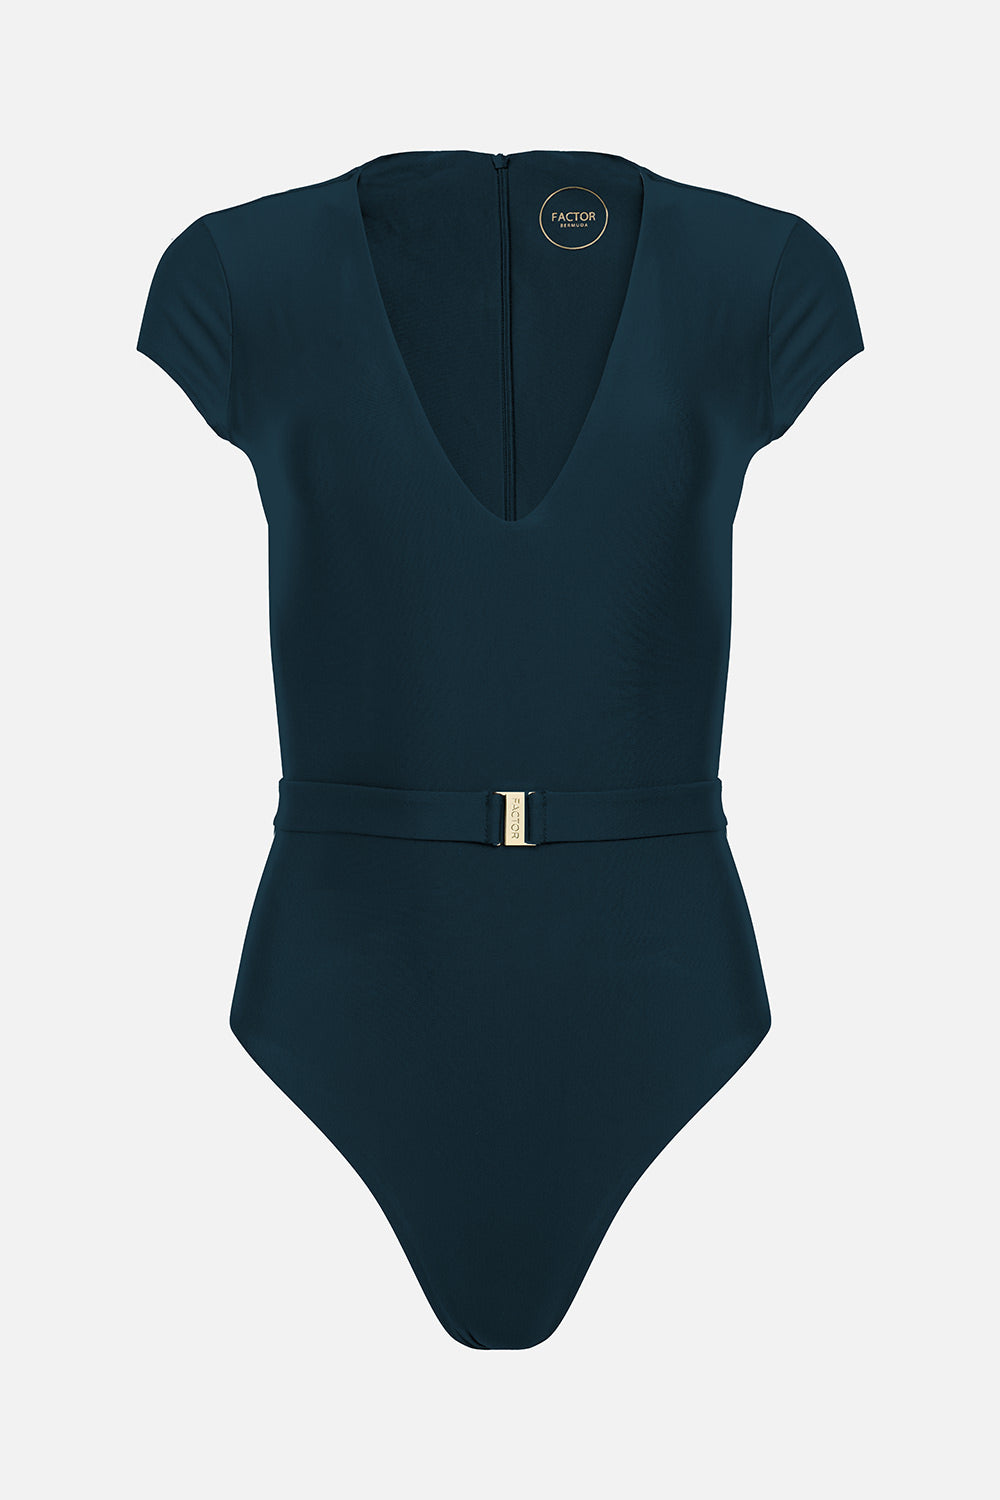 The Plunge Silhouette Swimsuit in Palm